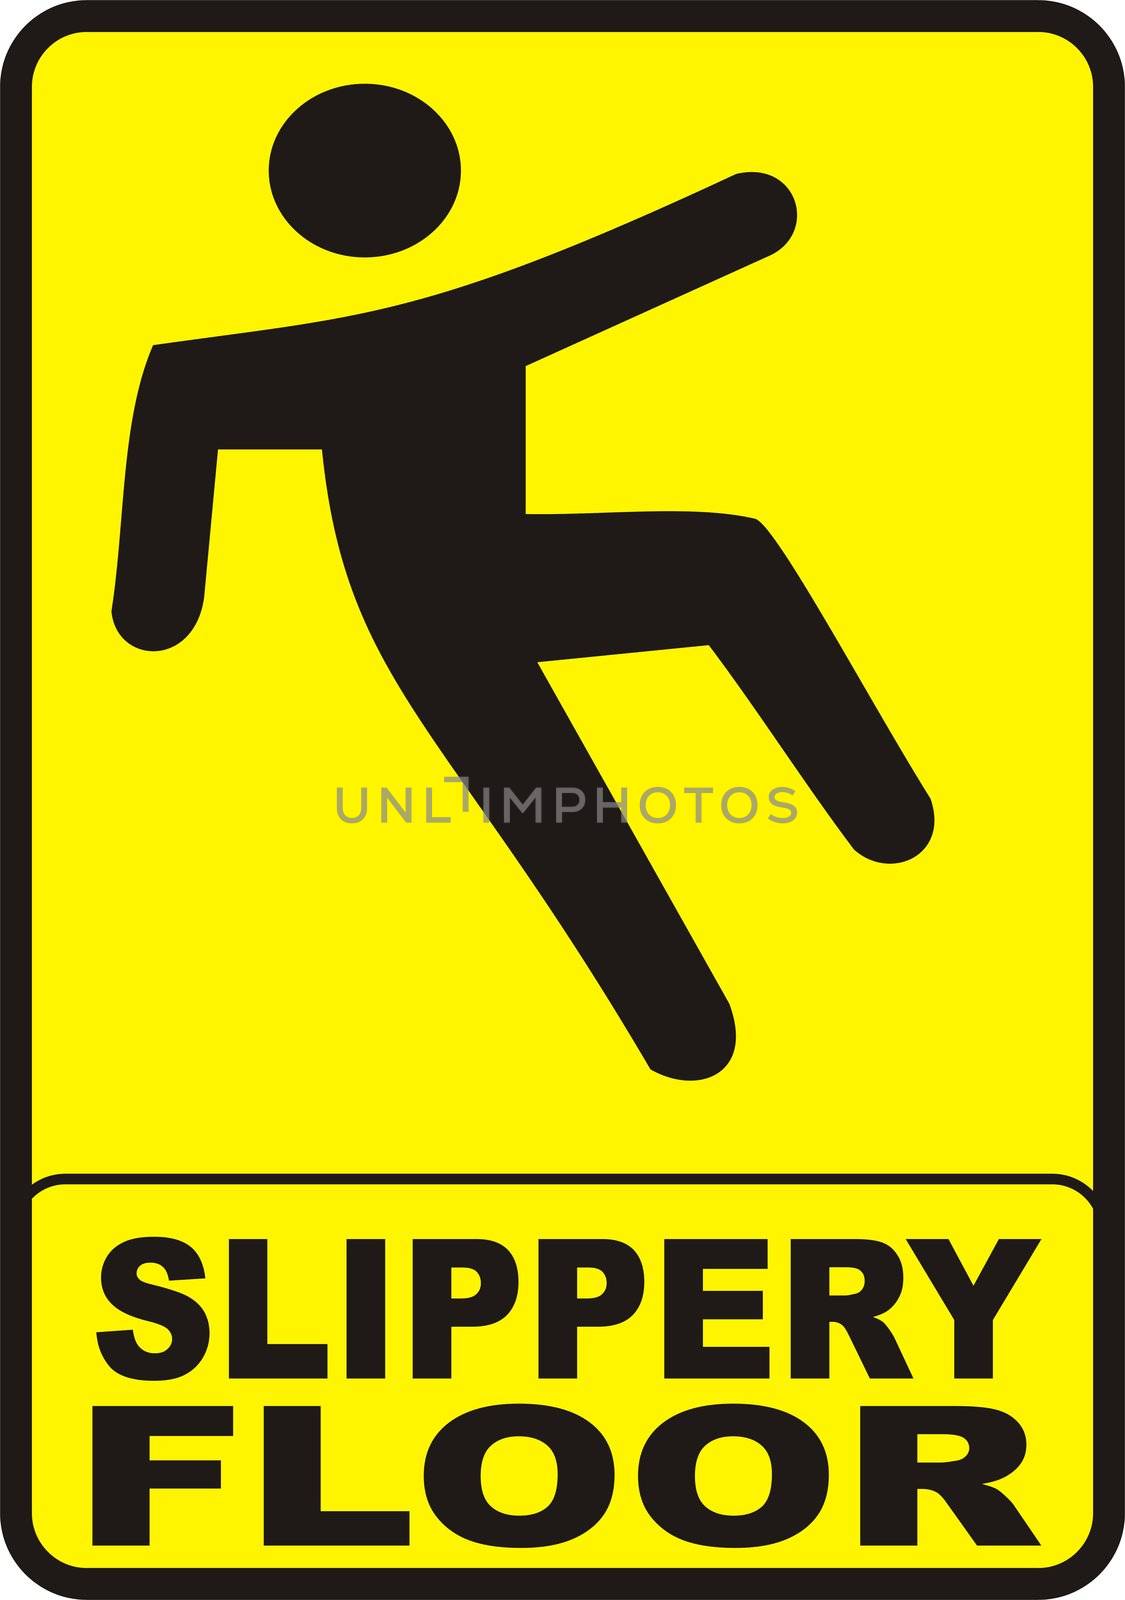 sign with yellow background indicating a slippery wet floor